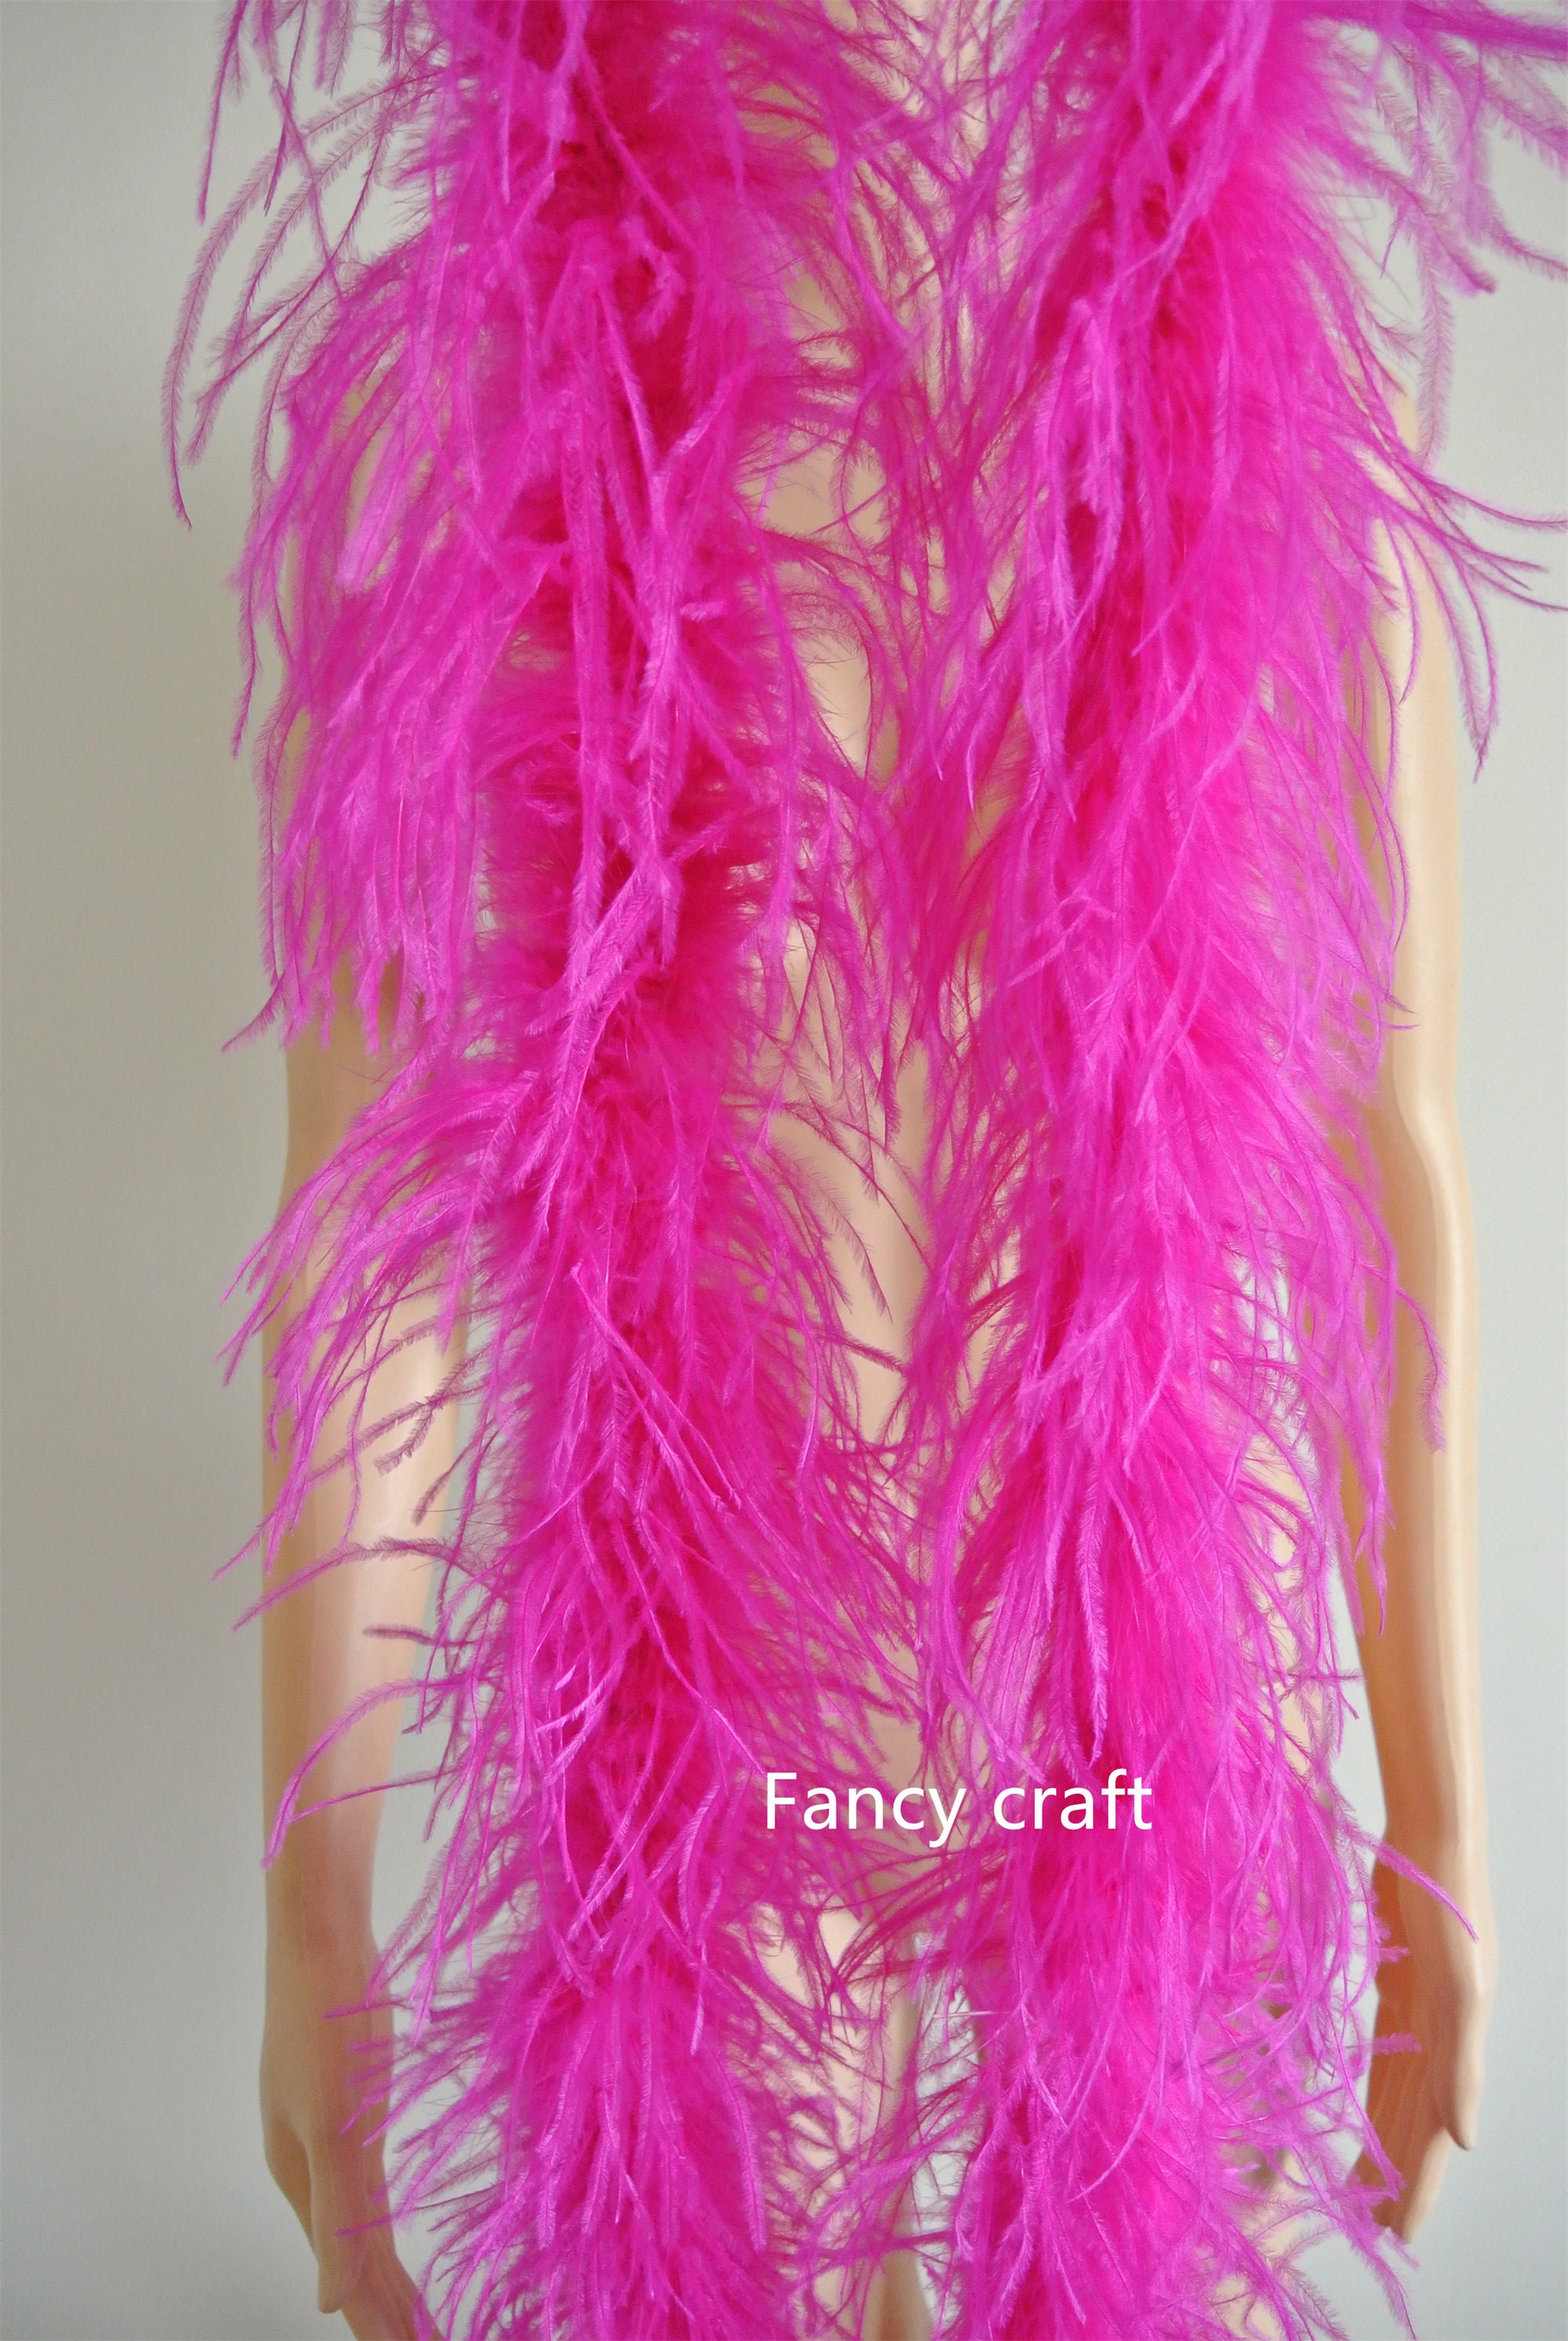 Larryhot Hot Pink Boa Feathers - 45g 2 Yards Boas for Party Bulk,Christmas,Wedding Centerpieces,Concert,Pet and Home Decoration(45g-HotPink)